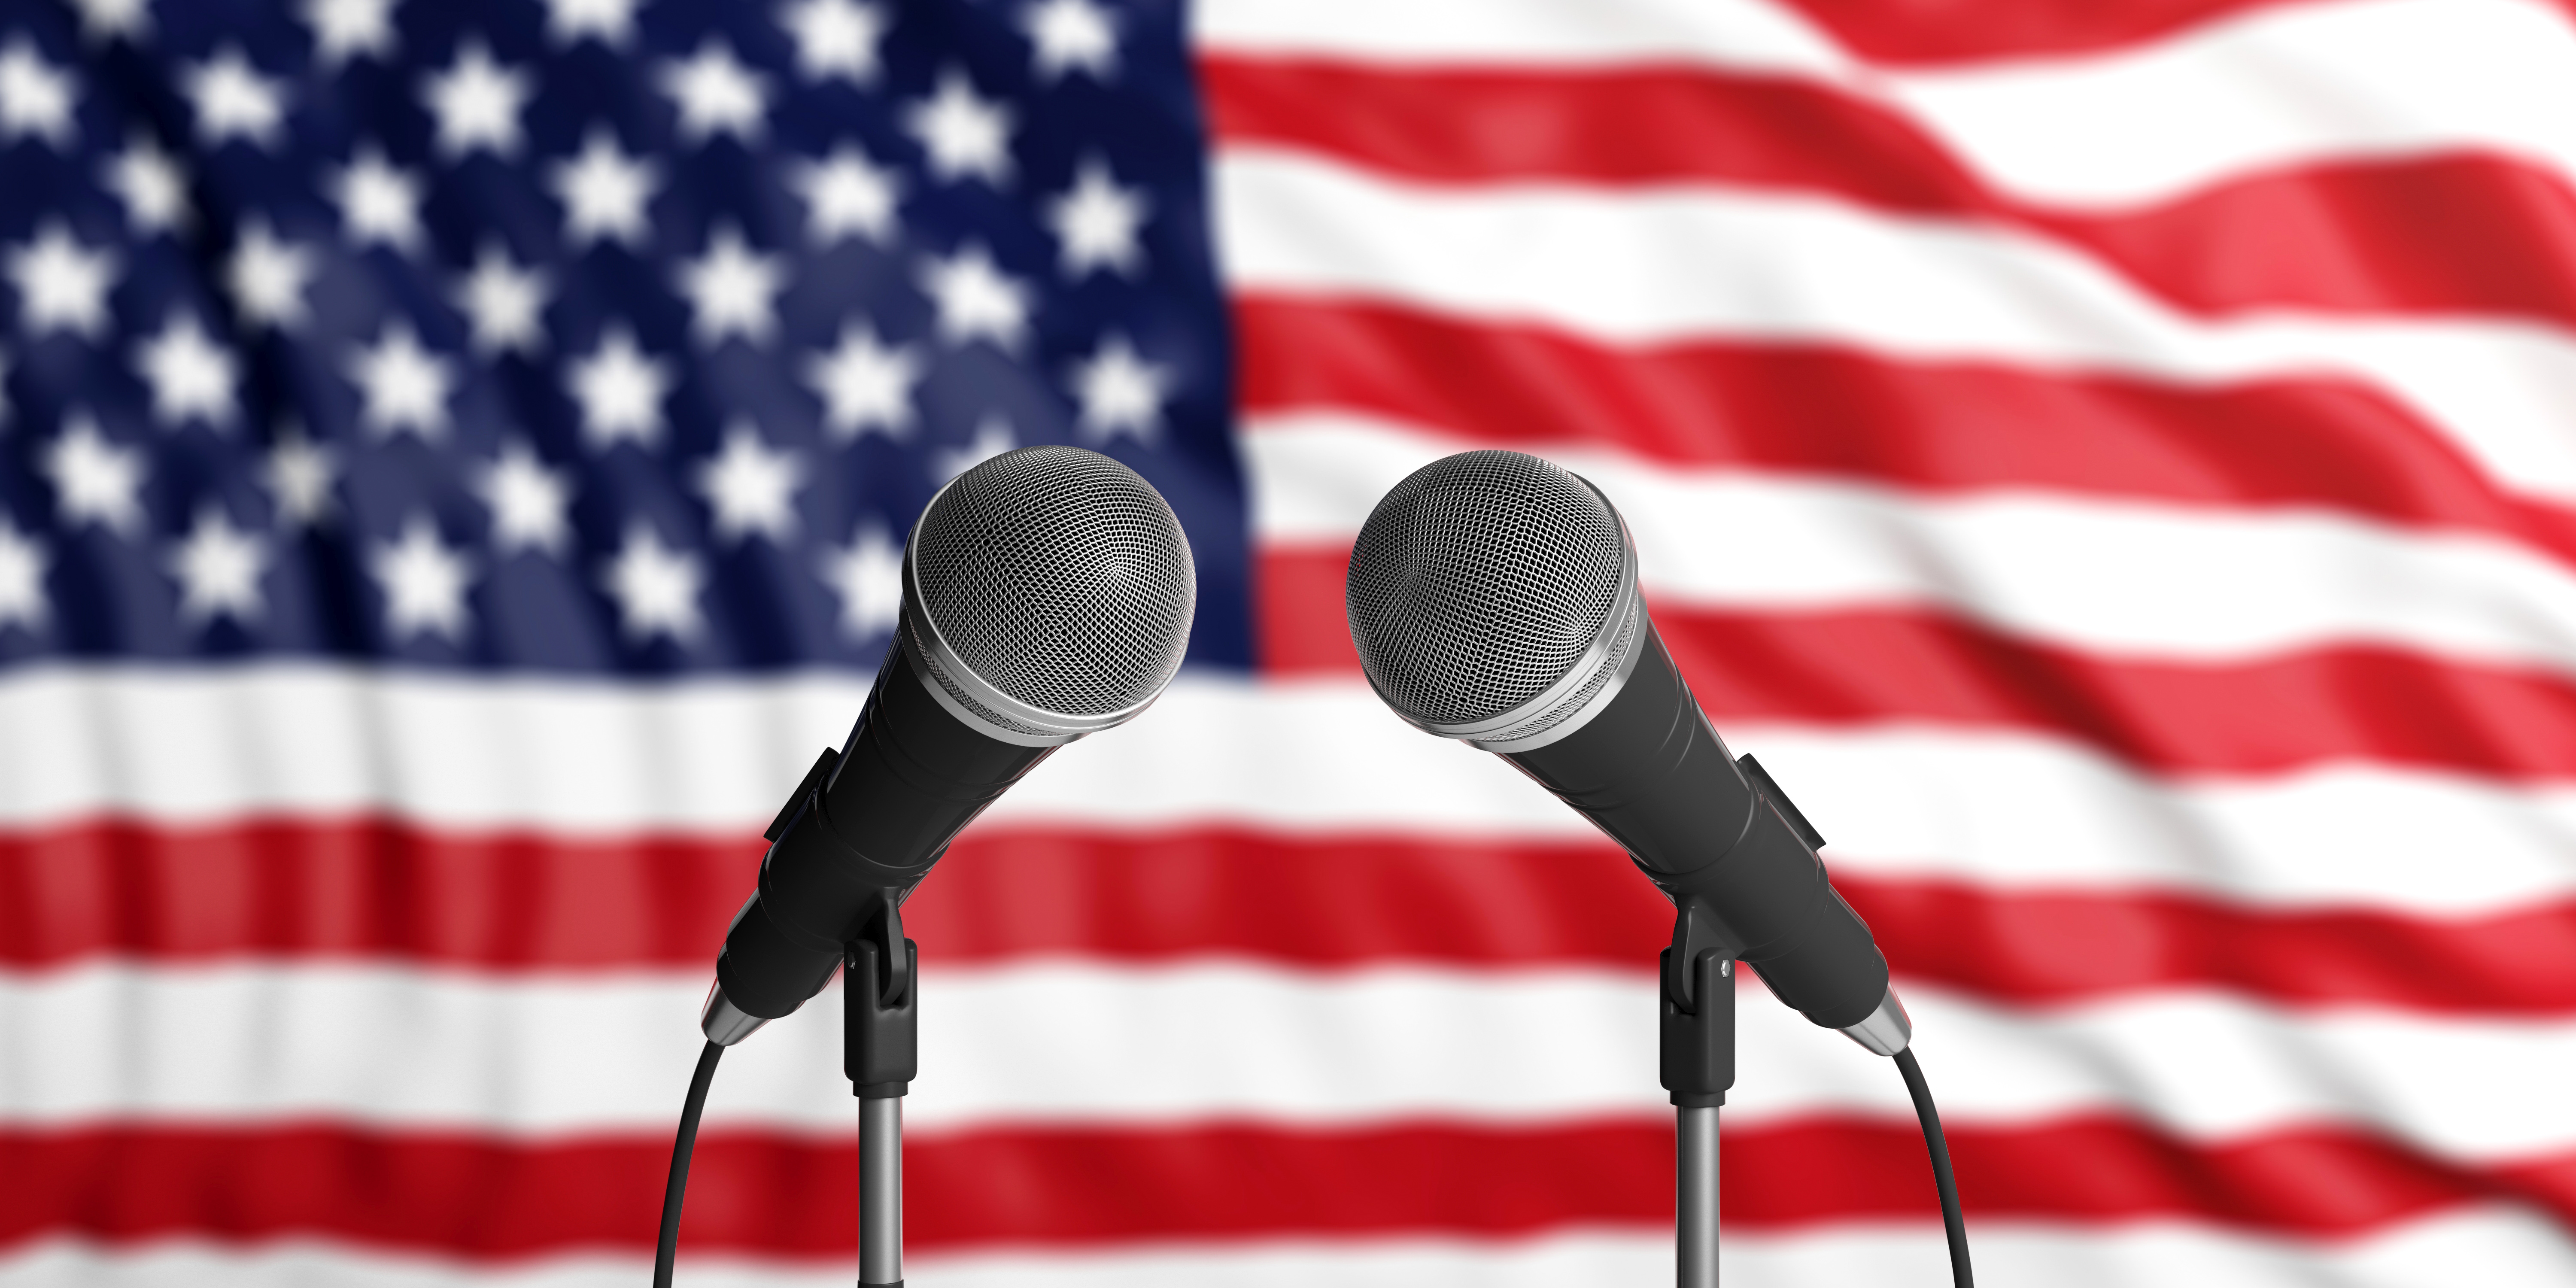 USA flag background with two microphones